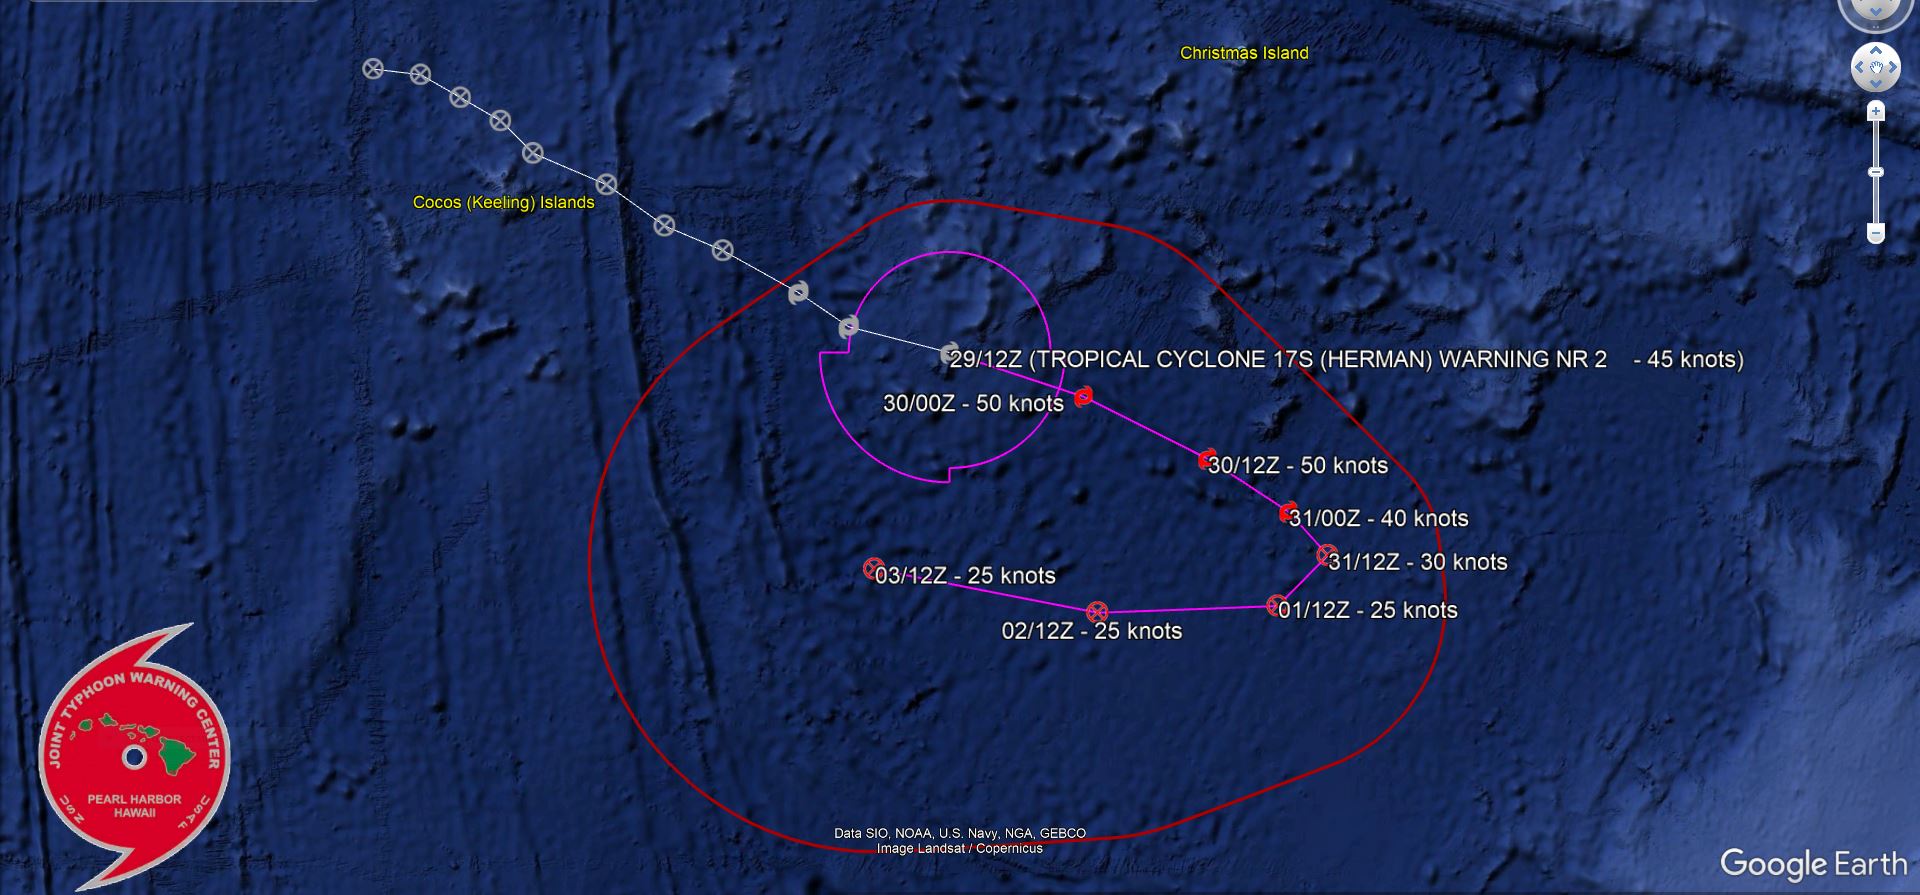 REMARKS: 291500Z POSITION NEAR 14.1S 102.6E. 29MAR23. TROPICAL CYCLONE 17S (HERMAN), LOCATED APPROXIMATELY 841 NM NORTHWEST OF LEARMONTH, AUSTRALIA, HAS TRACKED EAST- SOUTHEASTWARD AT 12 KNOTS OVER THE PAST SIX HOURS. MAXIMUM SIGNIFICANT WAVE HEIGHT AT 291200Z IS 19 FEET.